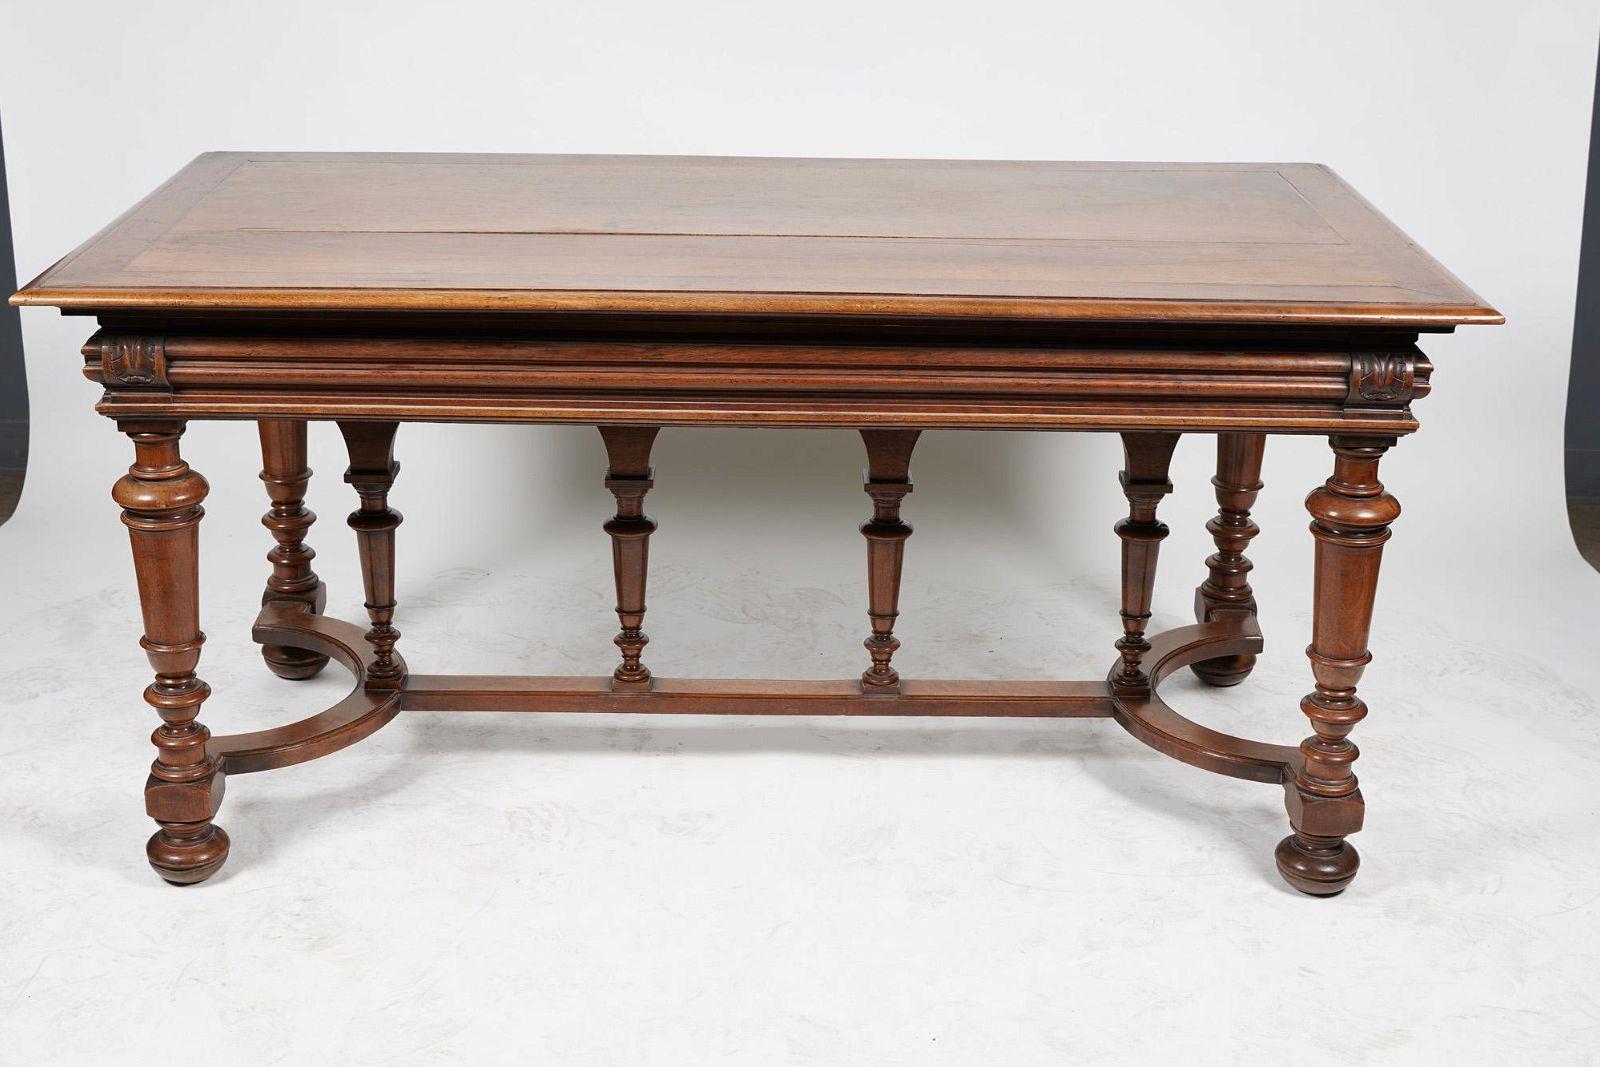 Hand-Crafted Antique American Renaissance Revival Walnut Library Table Desk Mid 19th Century For Sale